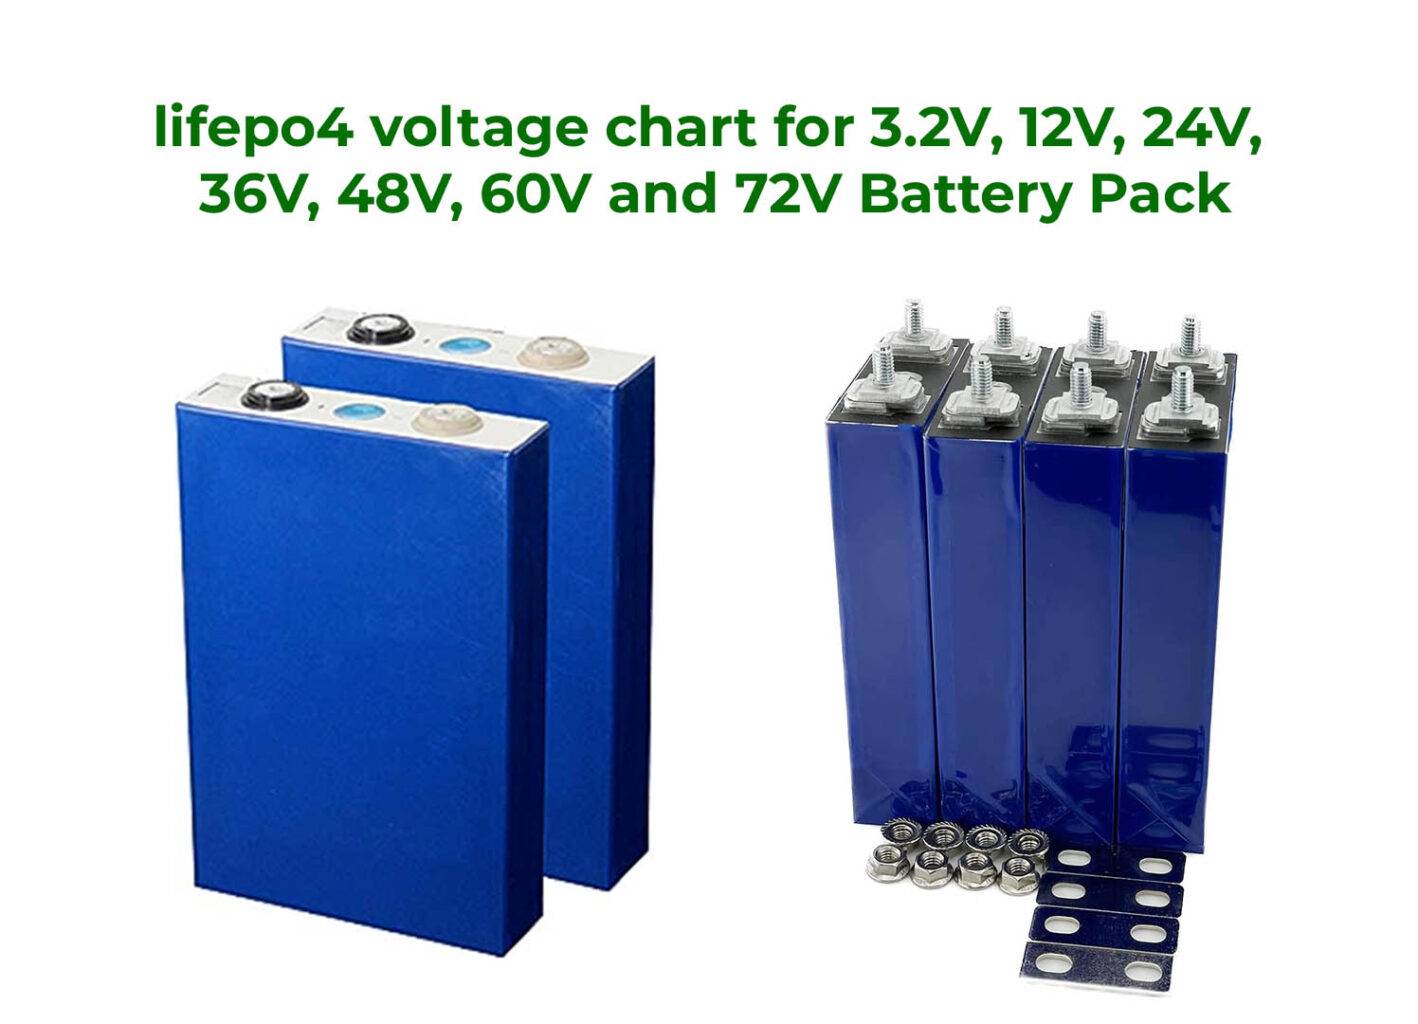 LiFePO4 Battery Voltage Chart